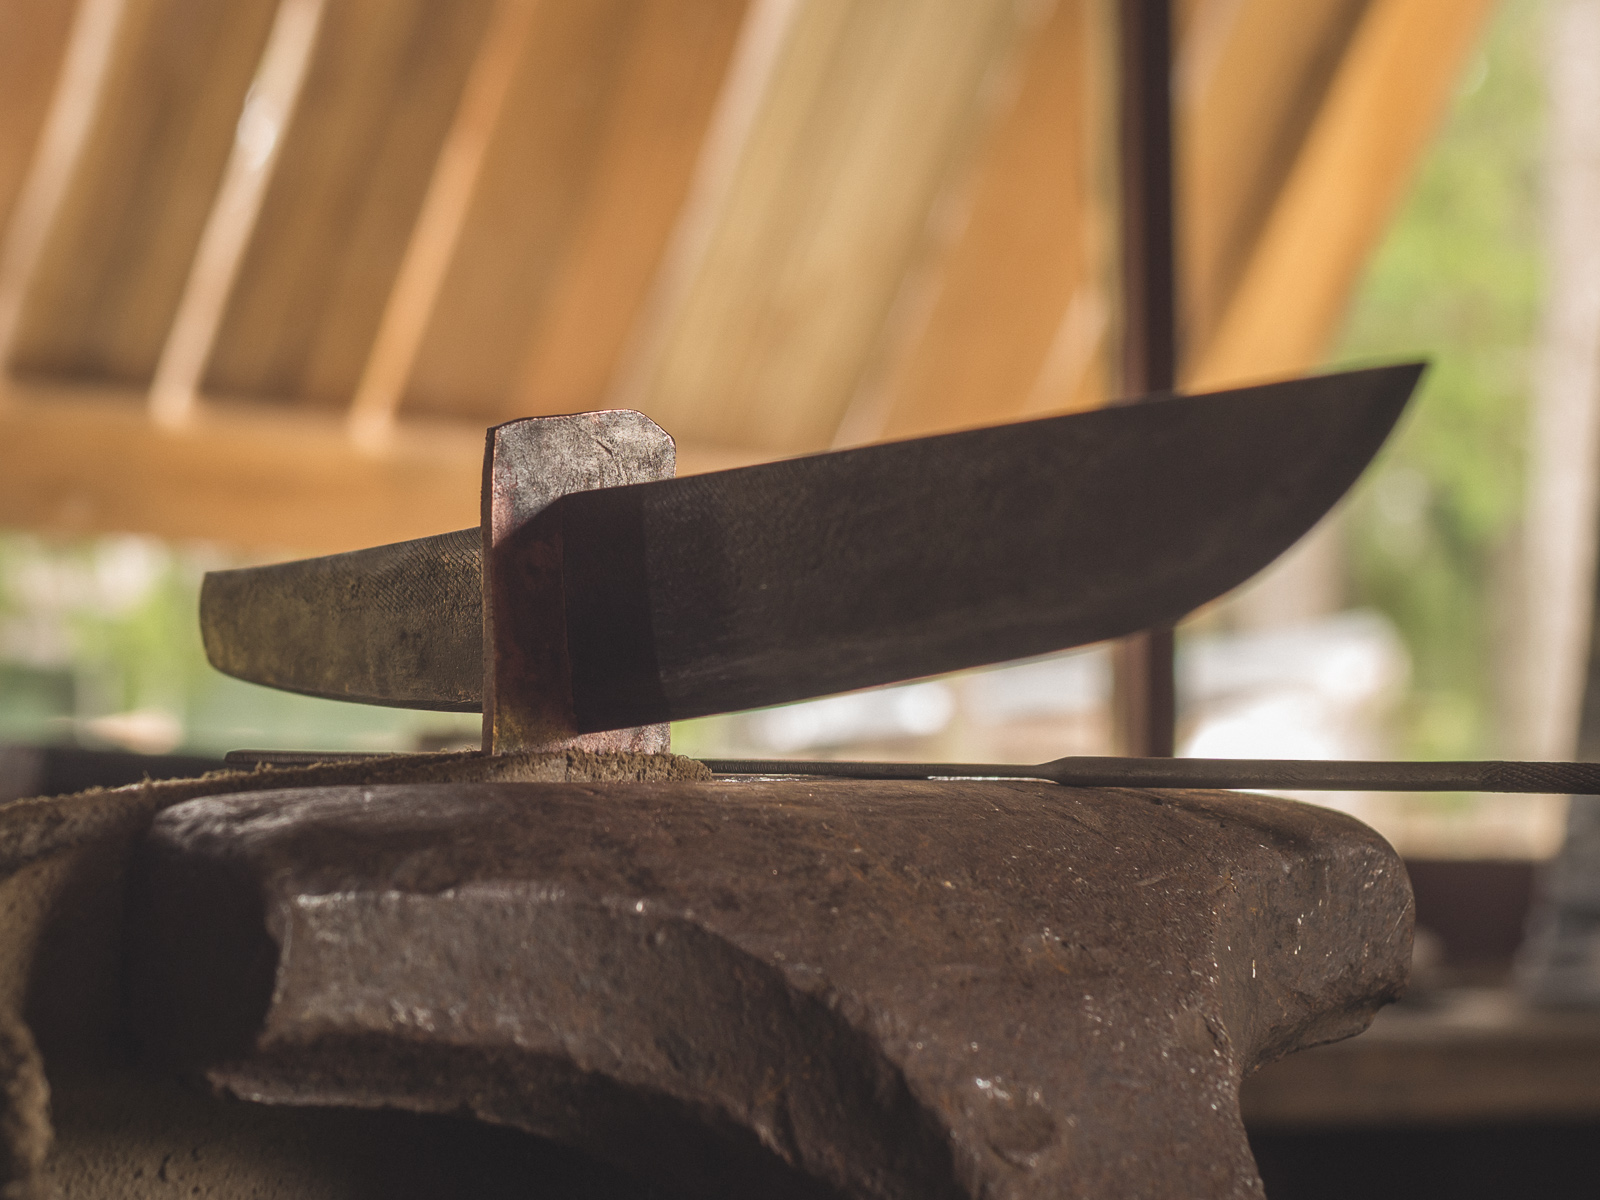 Island Blacksmith: Charcoal forged knives from reclaimed files.